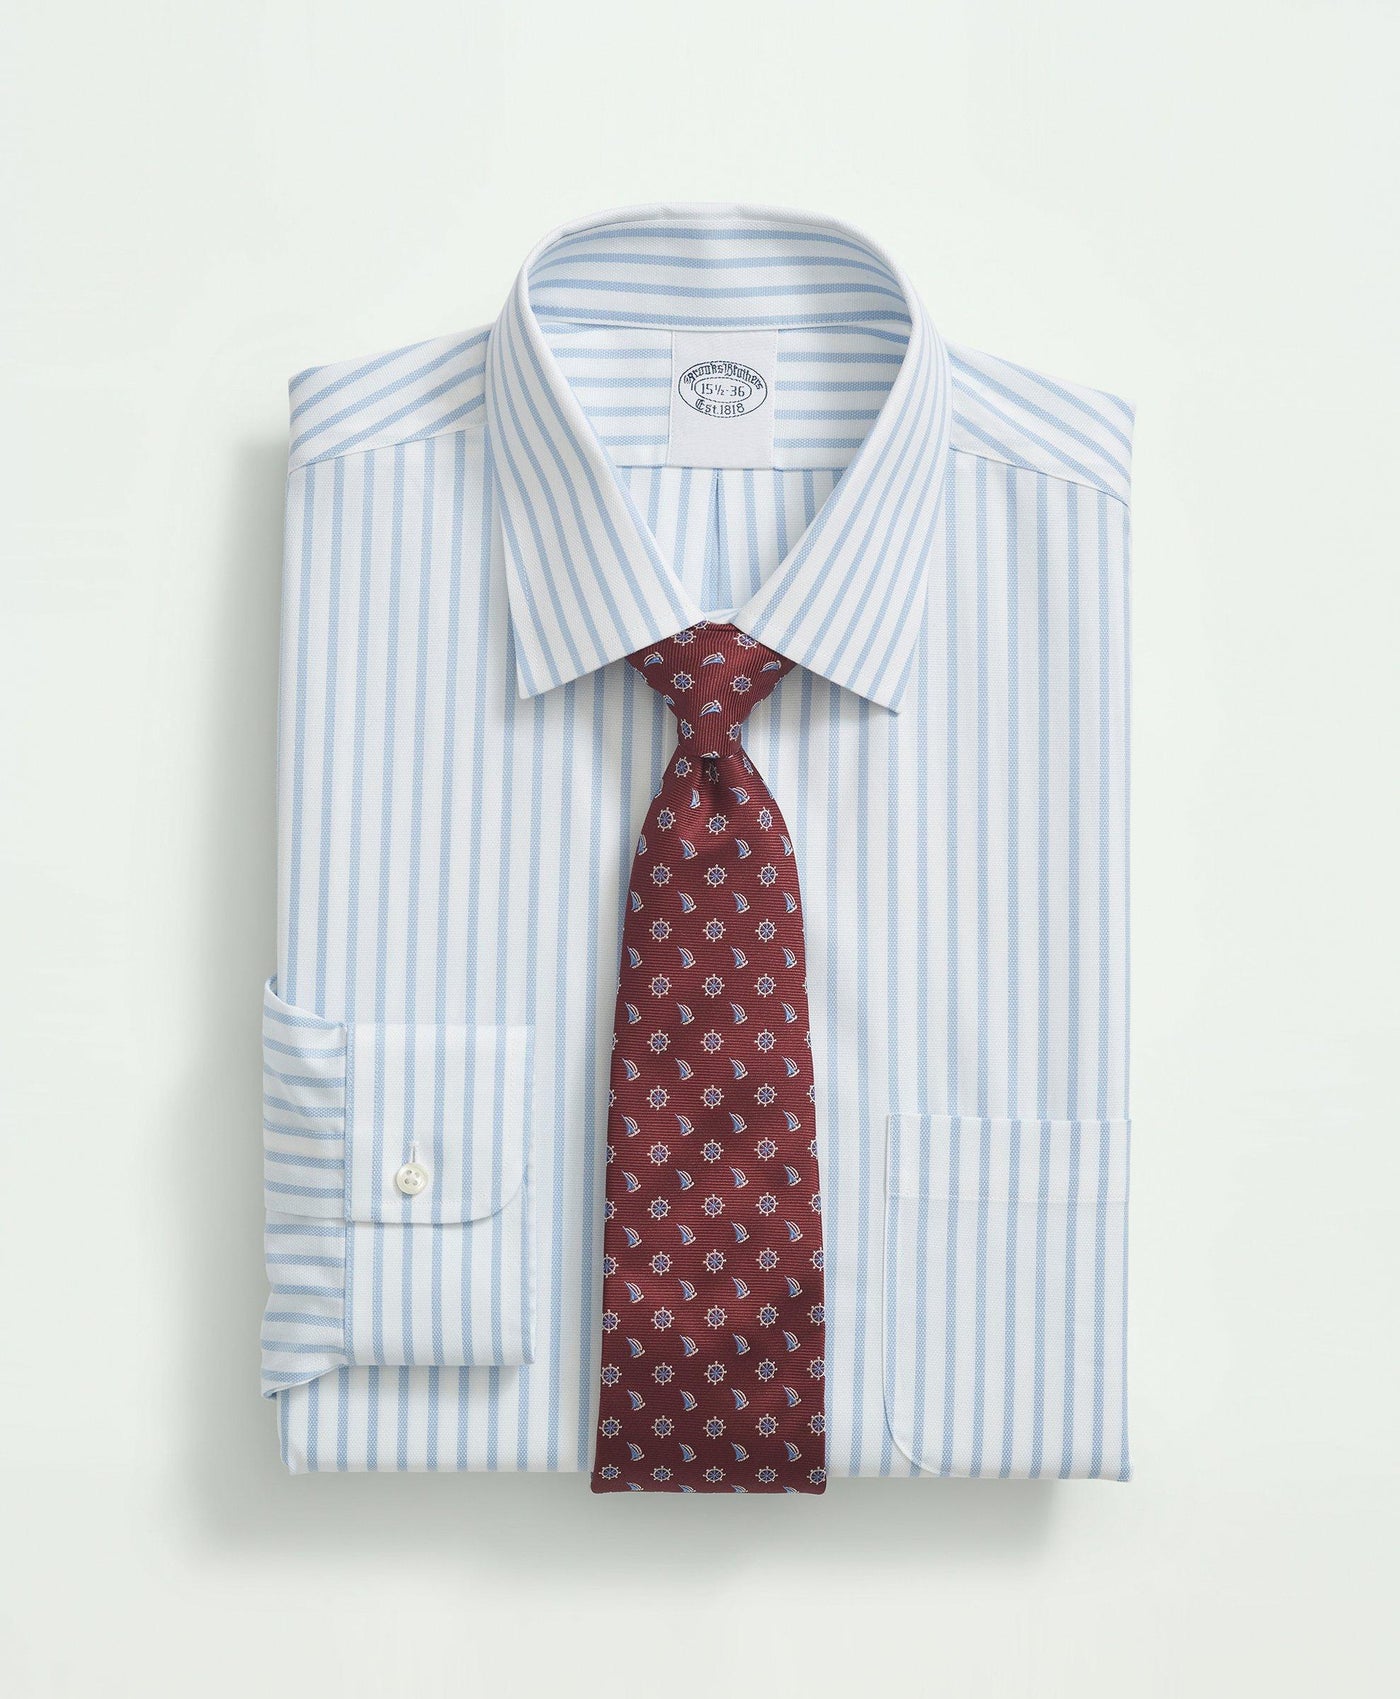 Stretch Regular-Fit Dress Shirt, Non-Iron Royal Oxford Ainsley Collar, Bengal Stripe - Brooks Brothers Canada